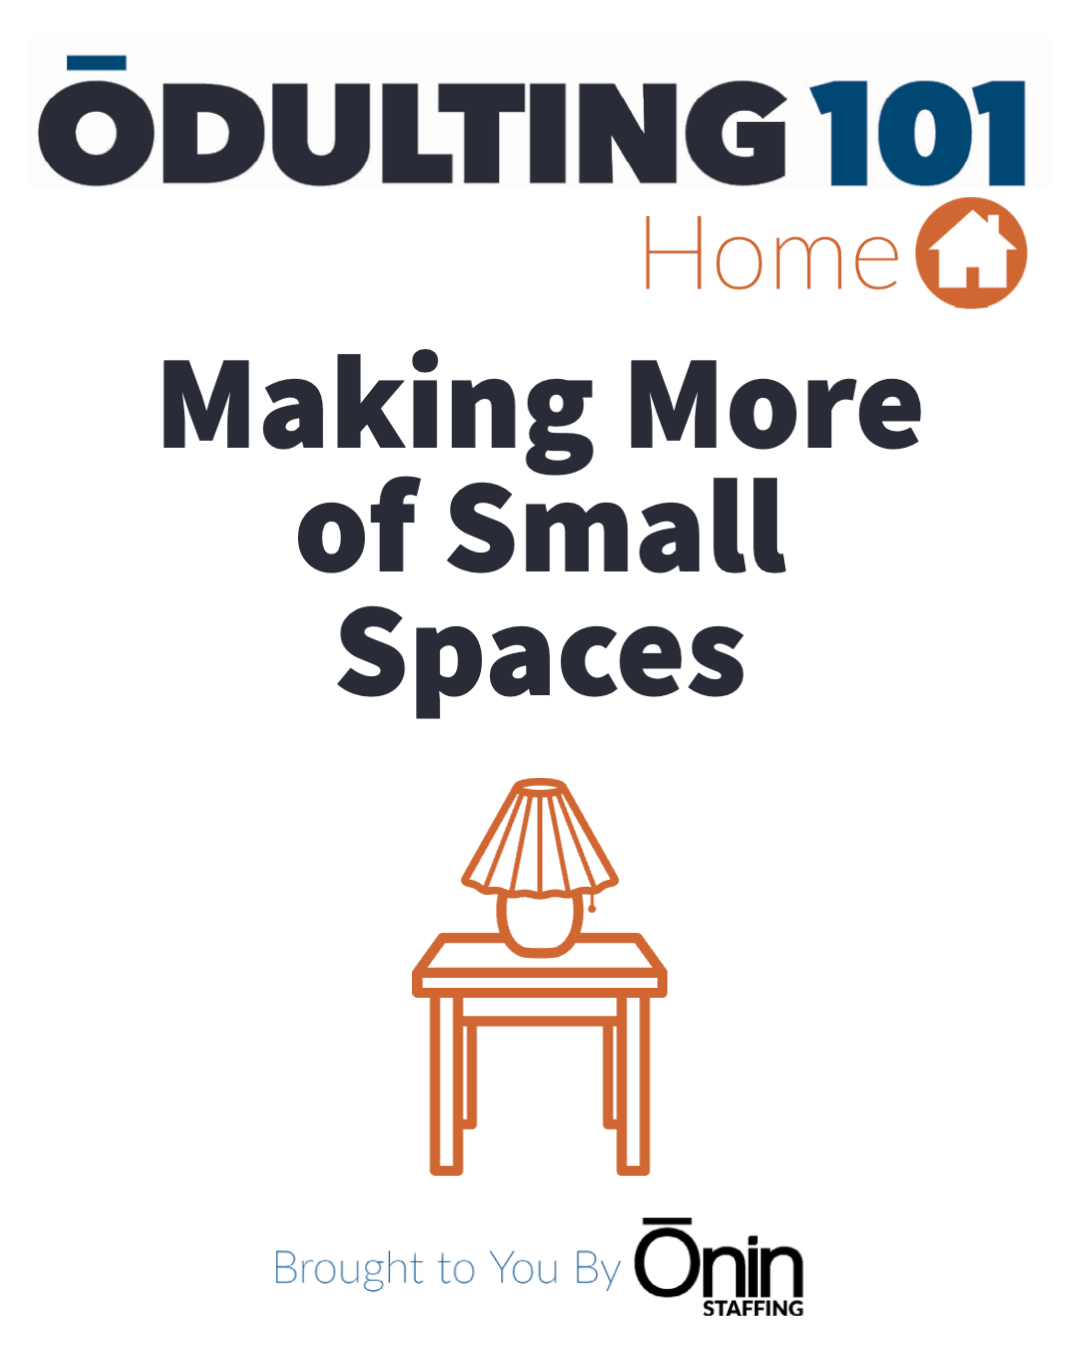 Odulting Home Series - Making More of Small Spaces blog title with an illustration of a table and lamp